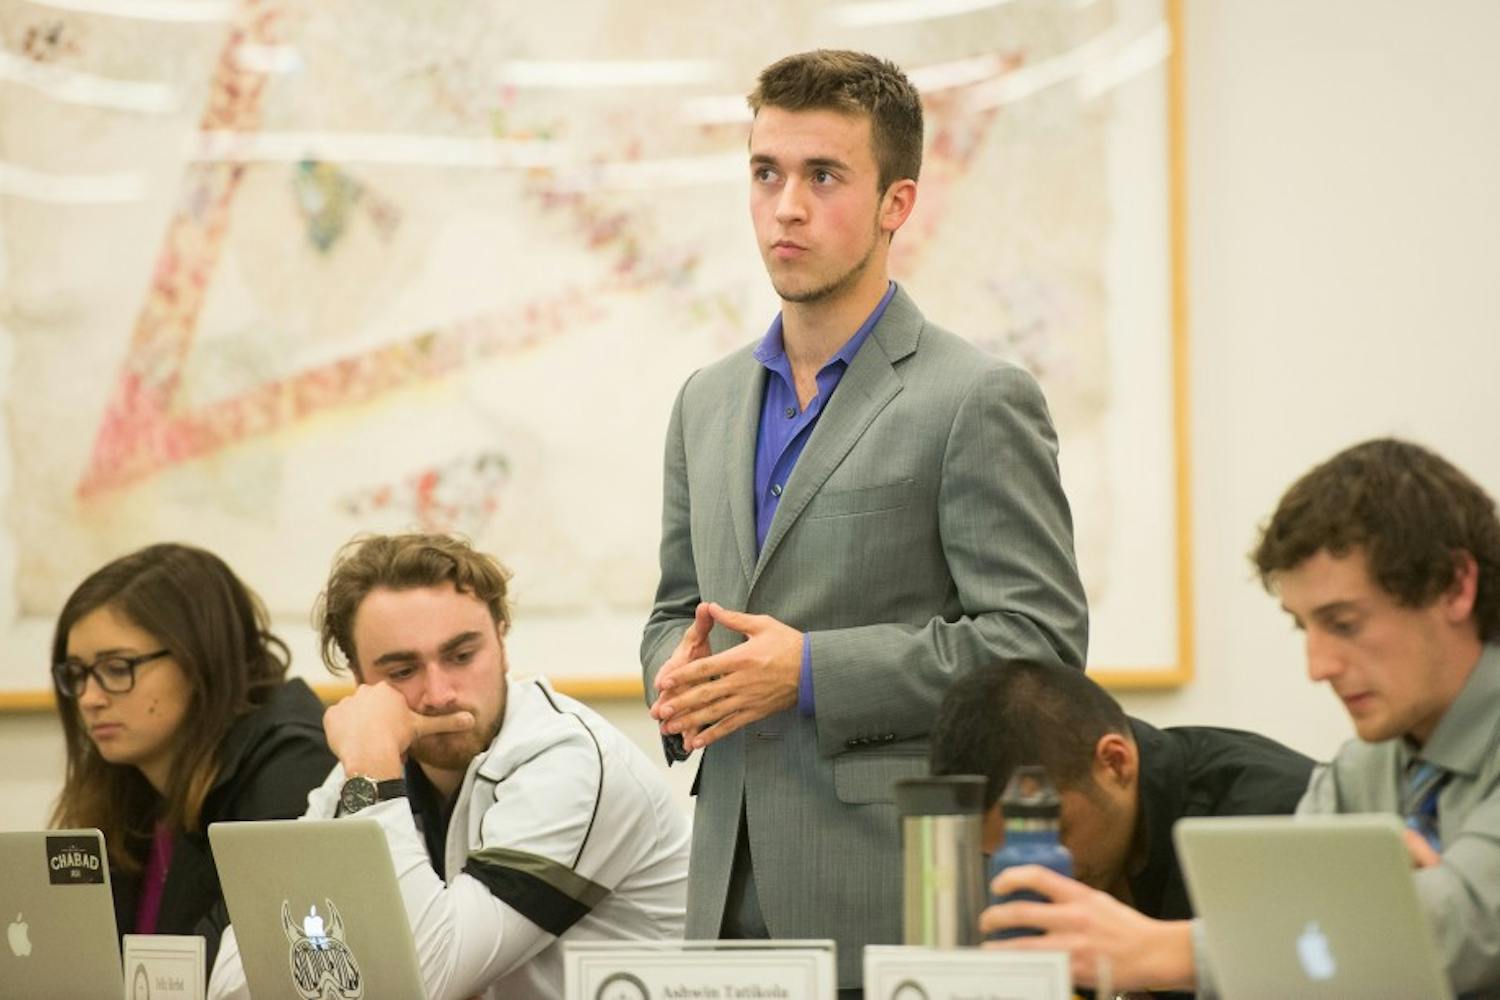 Senator Felix Herbst of the University Affairs committee speaks at a Tempe Undergraduate Student Government meeting on Tuesday, Jan. 19, 2016, at the Memorial Union on the Tempe campus.